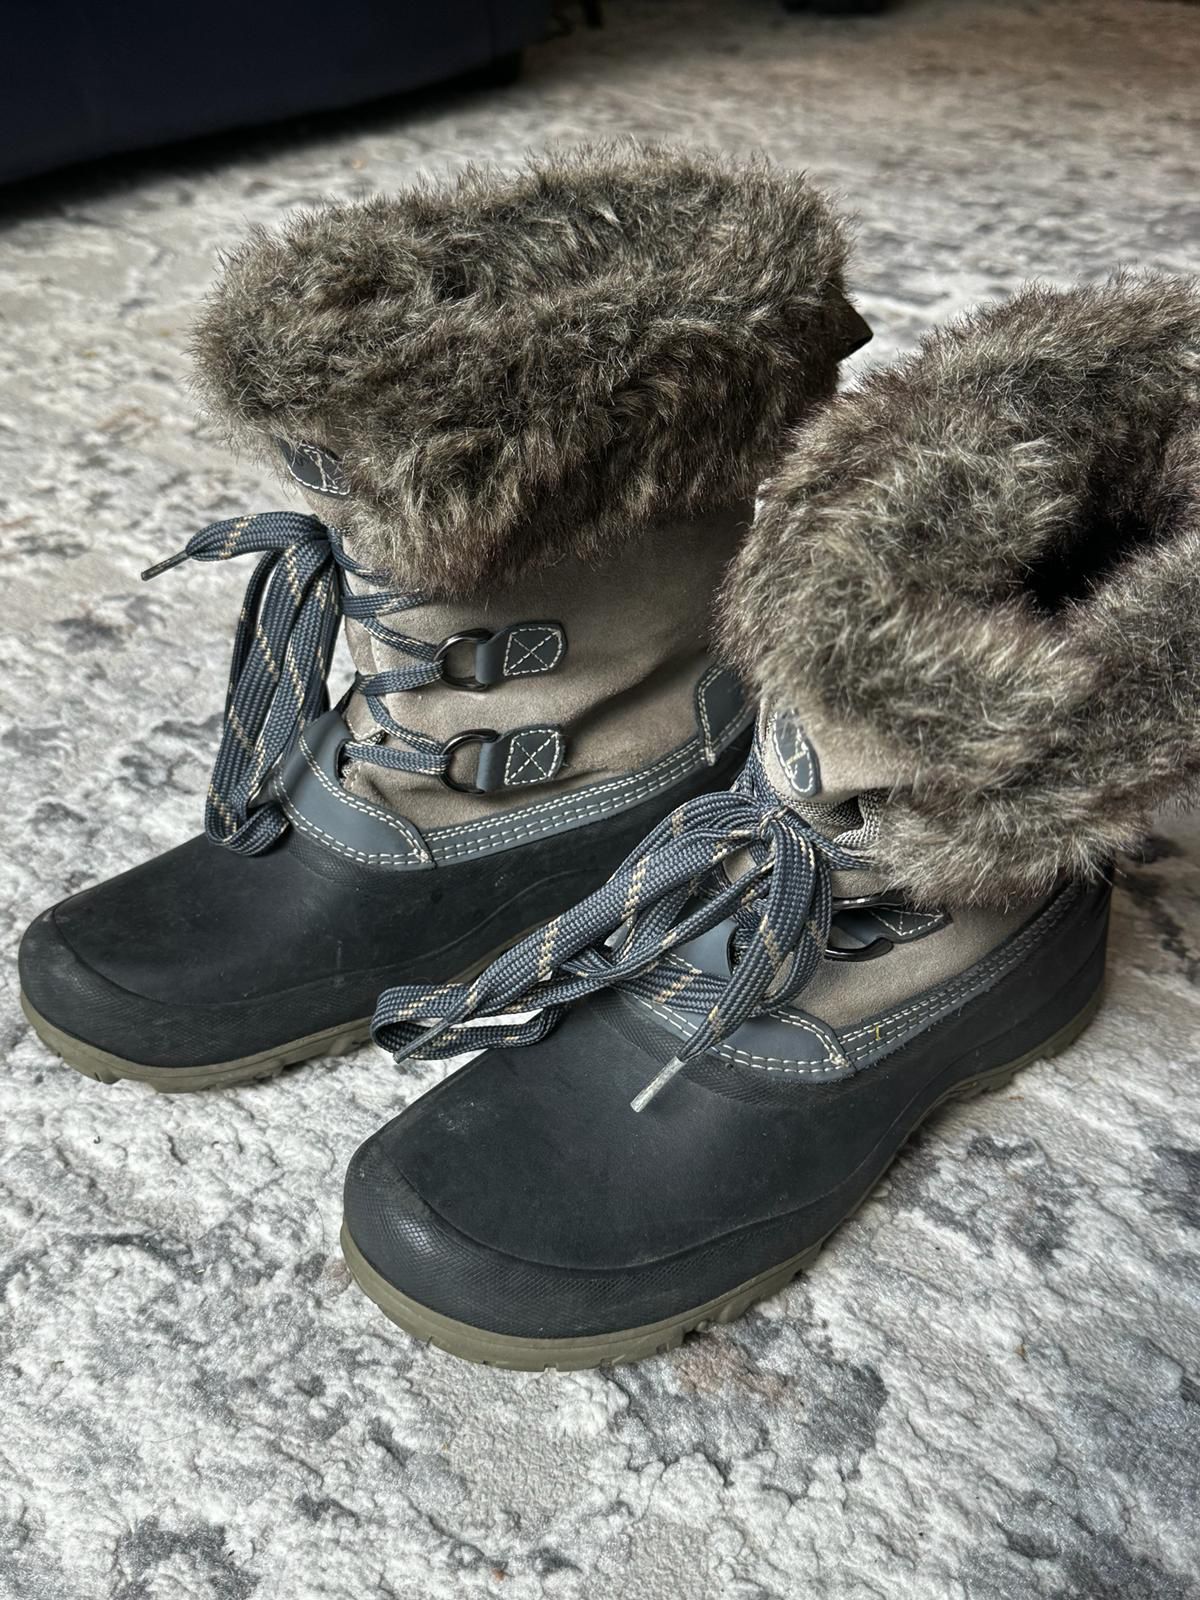 Snow Boots For Girl